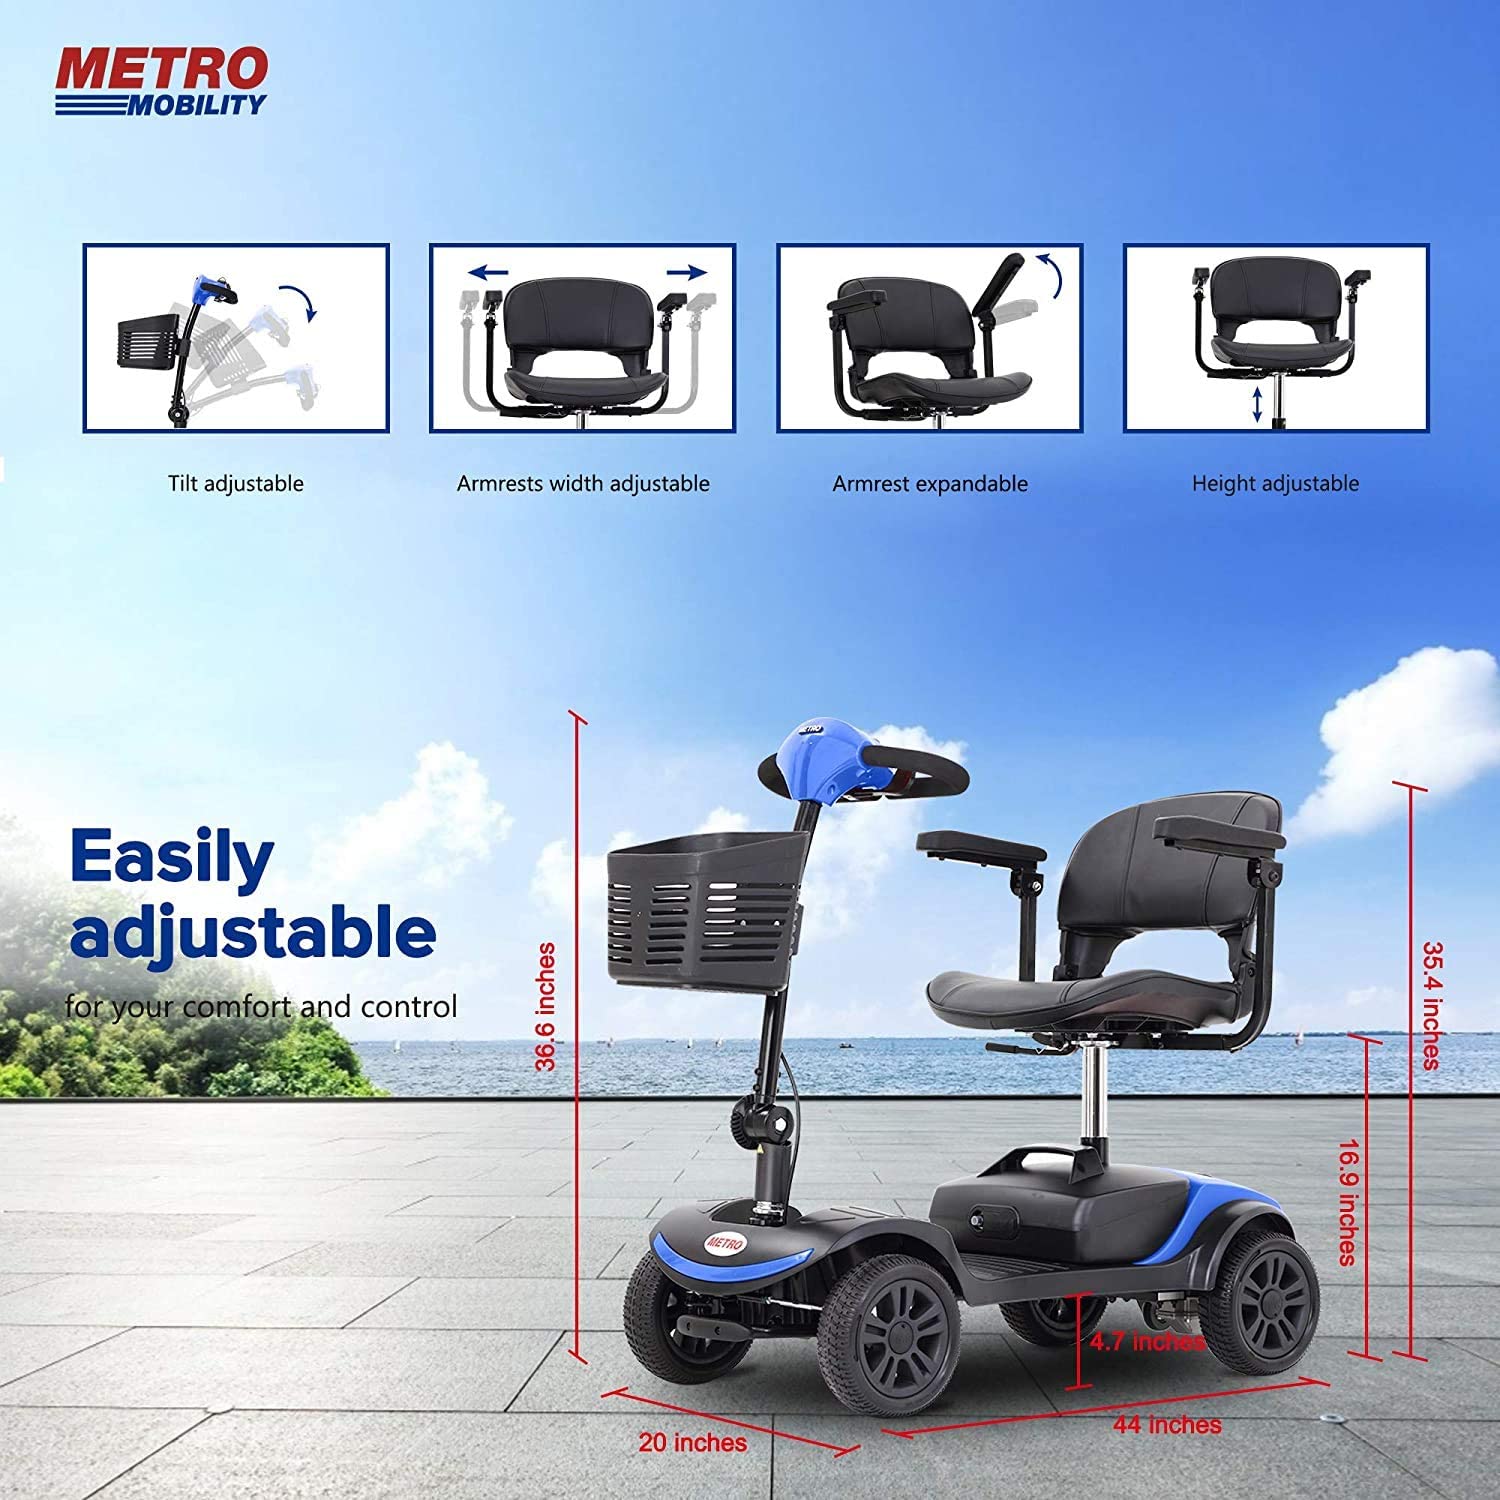 4 Wheel Mobility Scooter, Electric Wheelchair Device, Compact Heavy Mobility Scooter with Basket, Foldable in Boot Trunk for Traveling with Seniors (Blue)